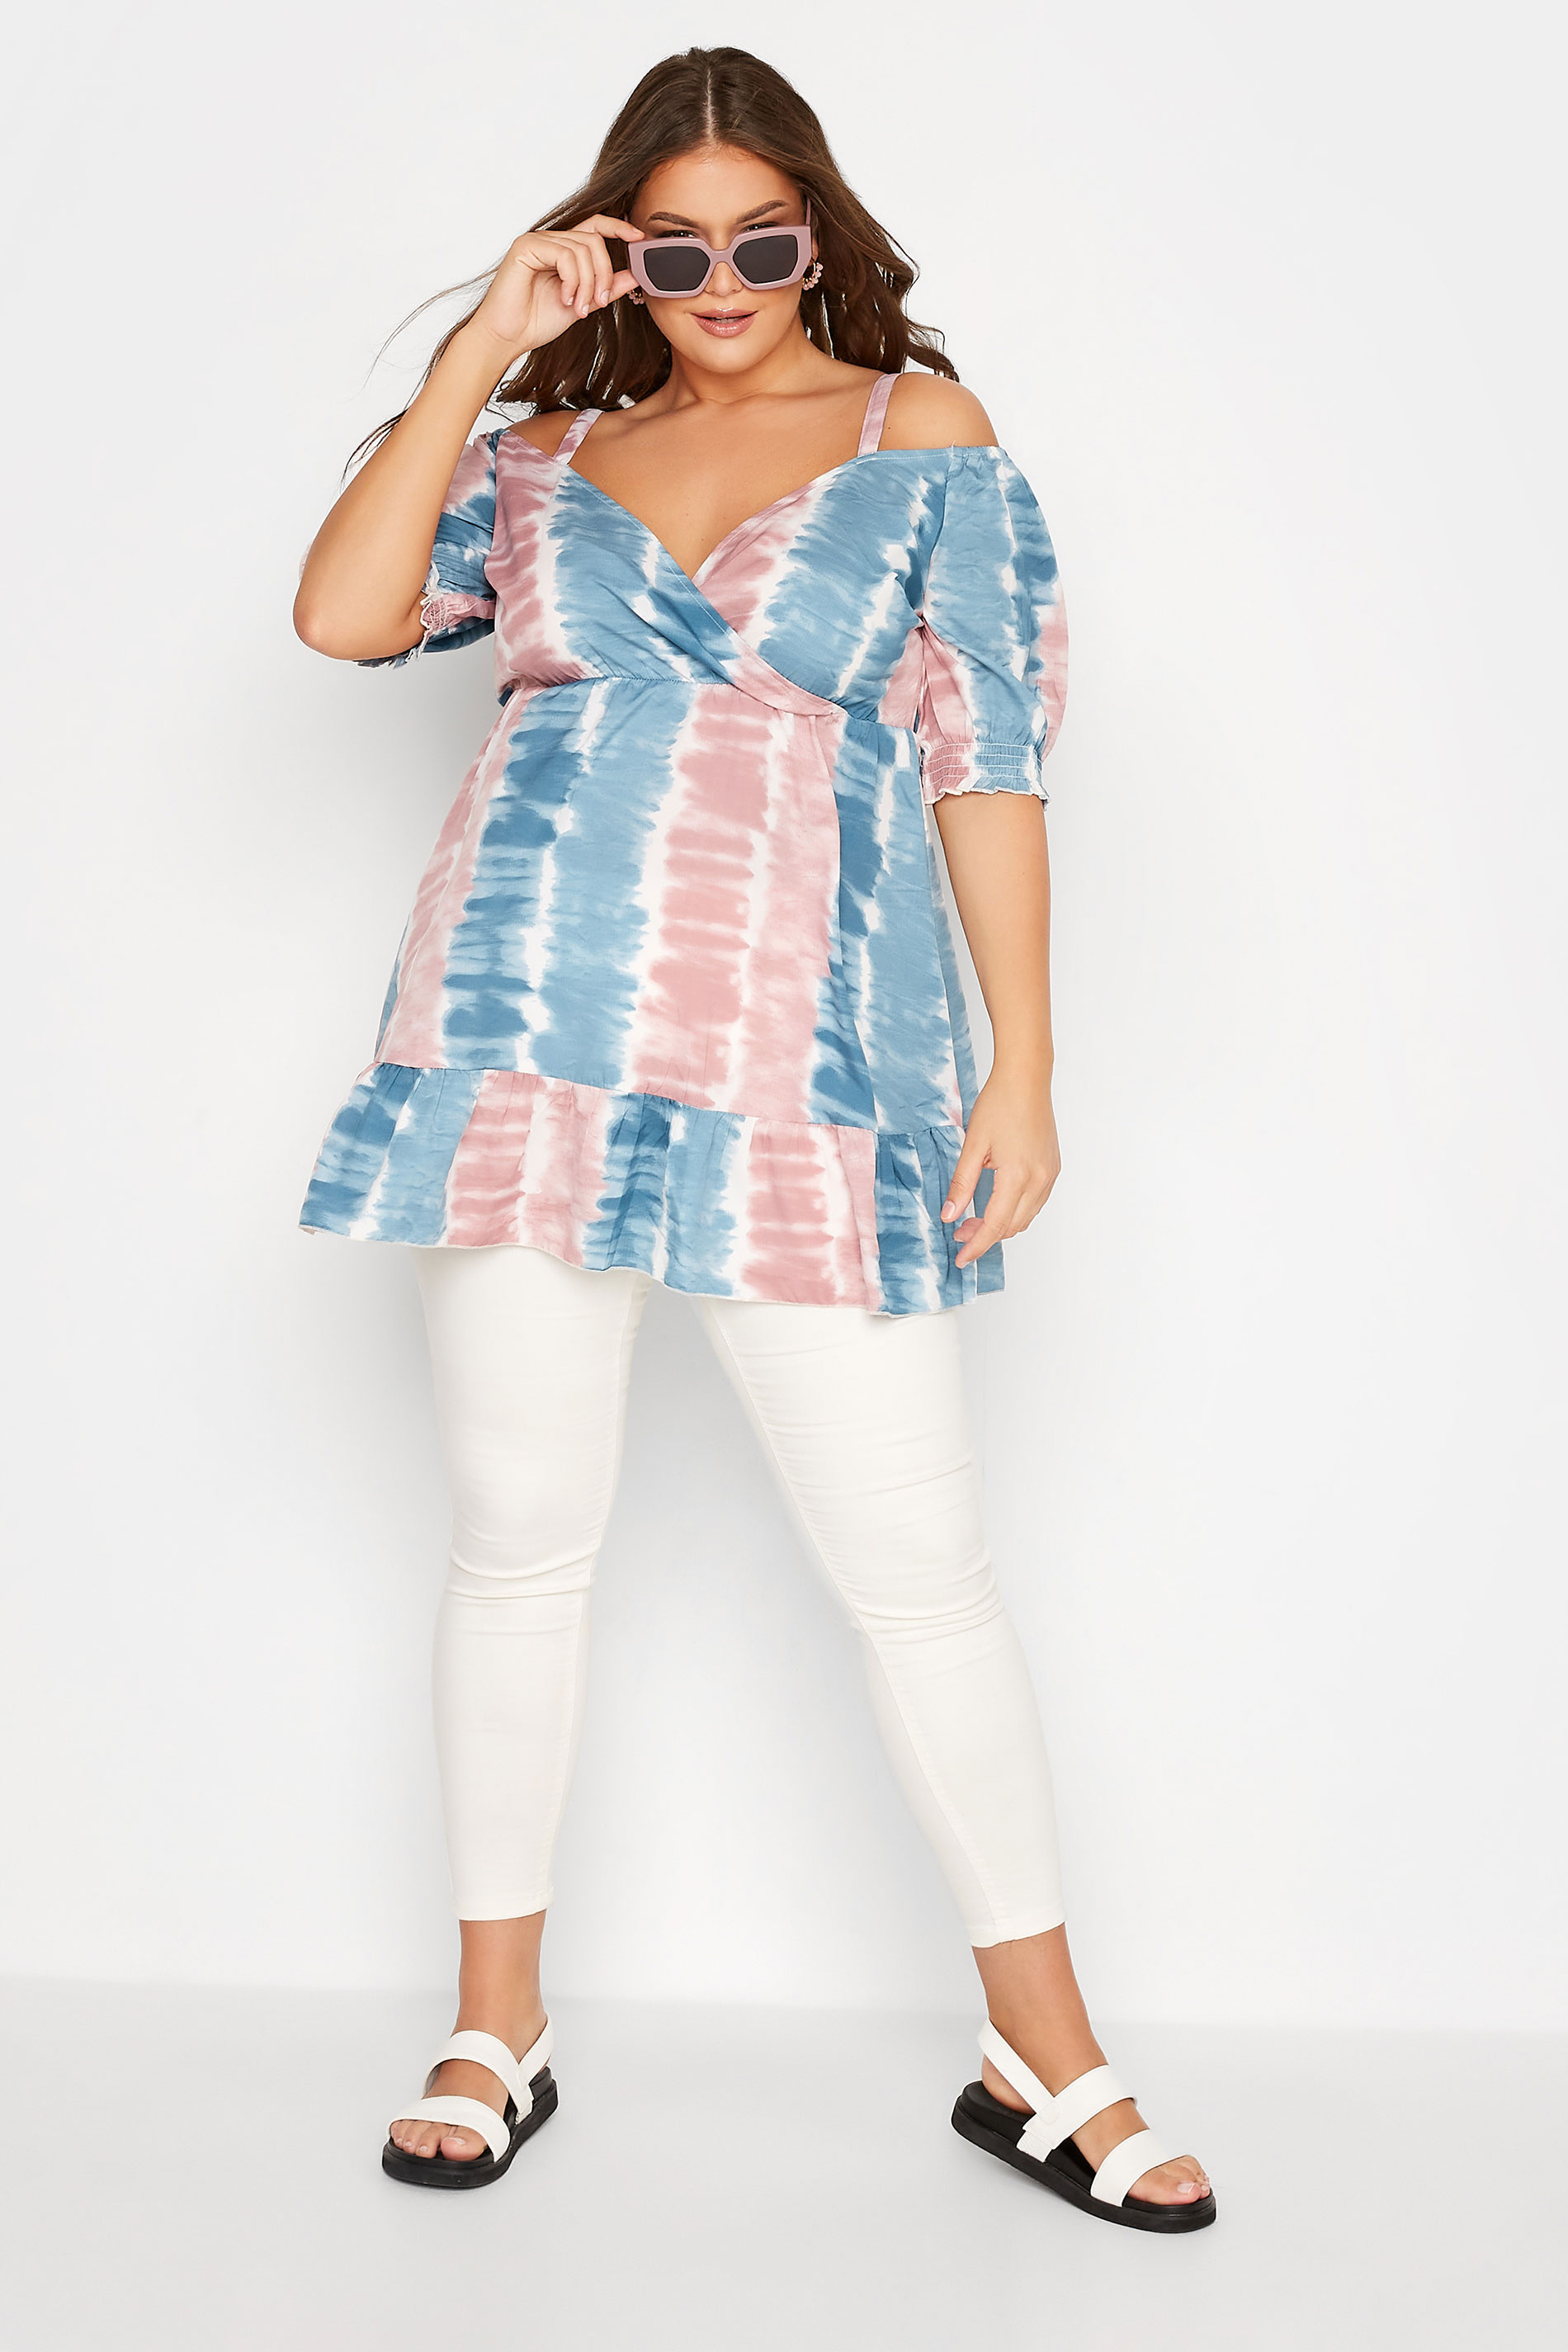 Grande taille  Tops Grande taille  Tops Casual | Curve Blue Tie Dye Stripe Print Cold Shoulder Top - XM27059